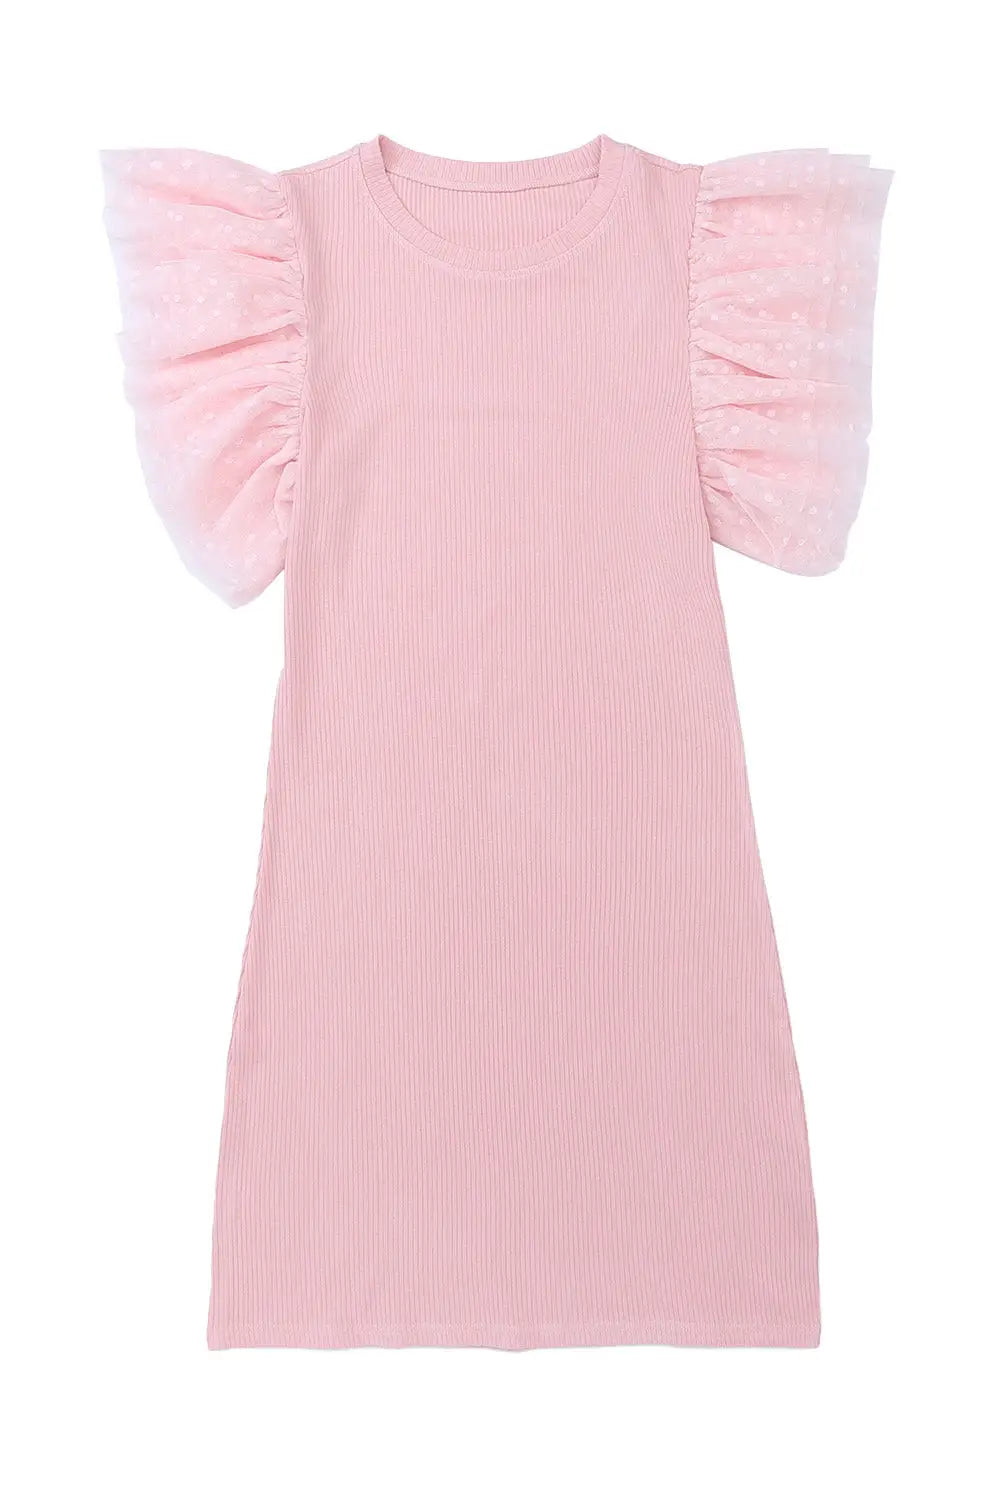 Pink ruffle tulle sleeve ribbed knit bodycon dress - dresses